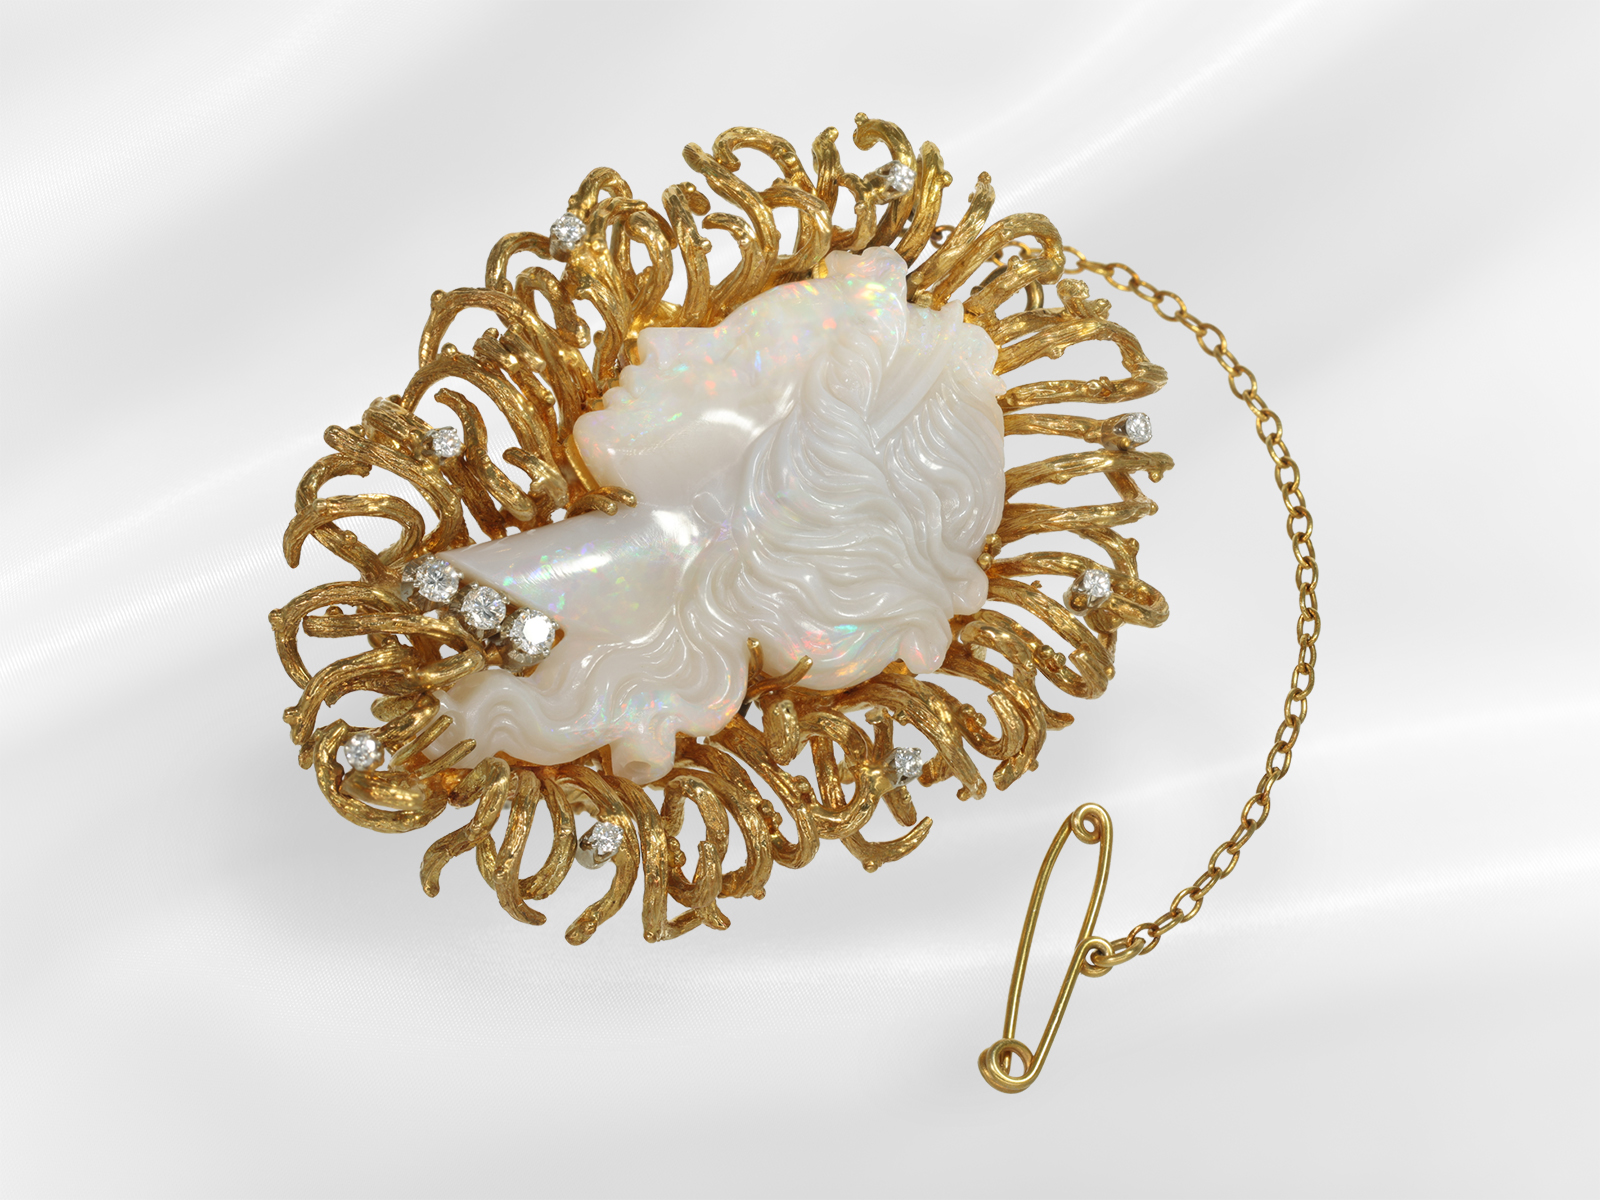 Brooch/pendant: unusual vintage goldsmith work with opal cameo, possibly Andrew Grima - Image 4 of 6